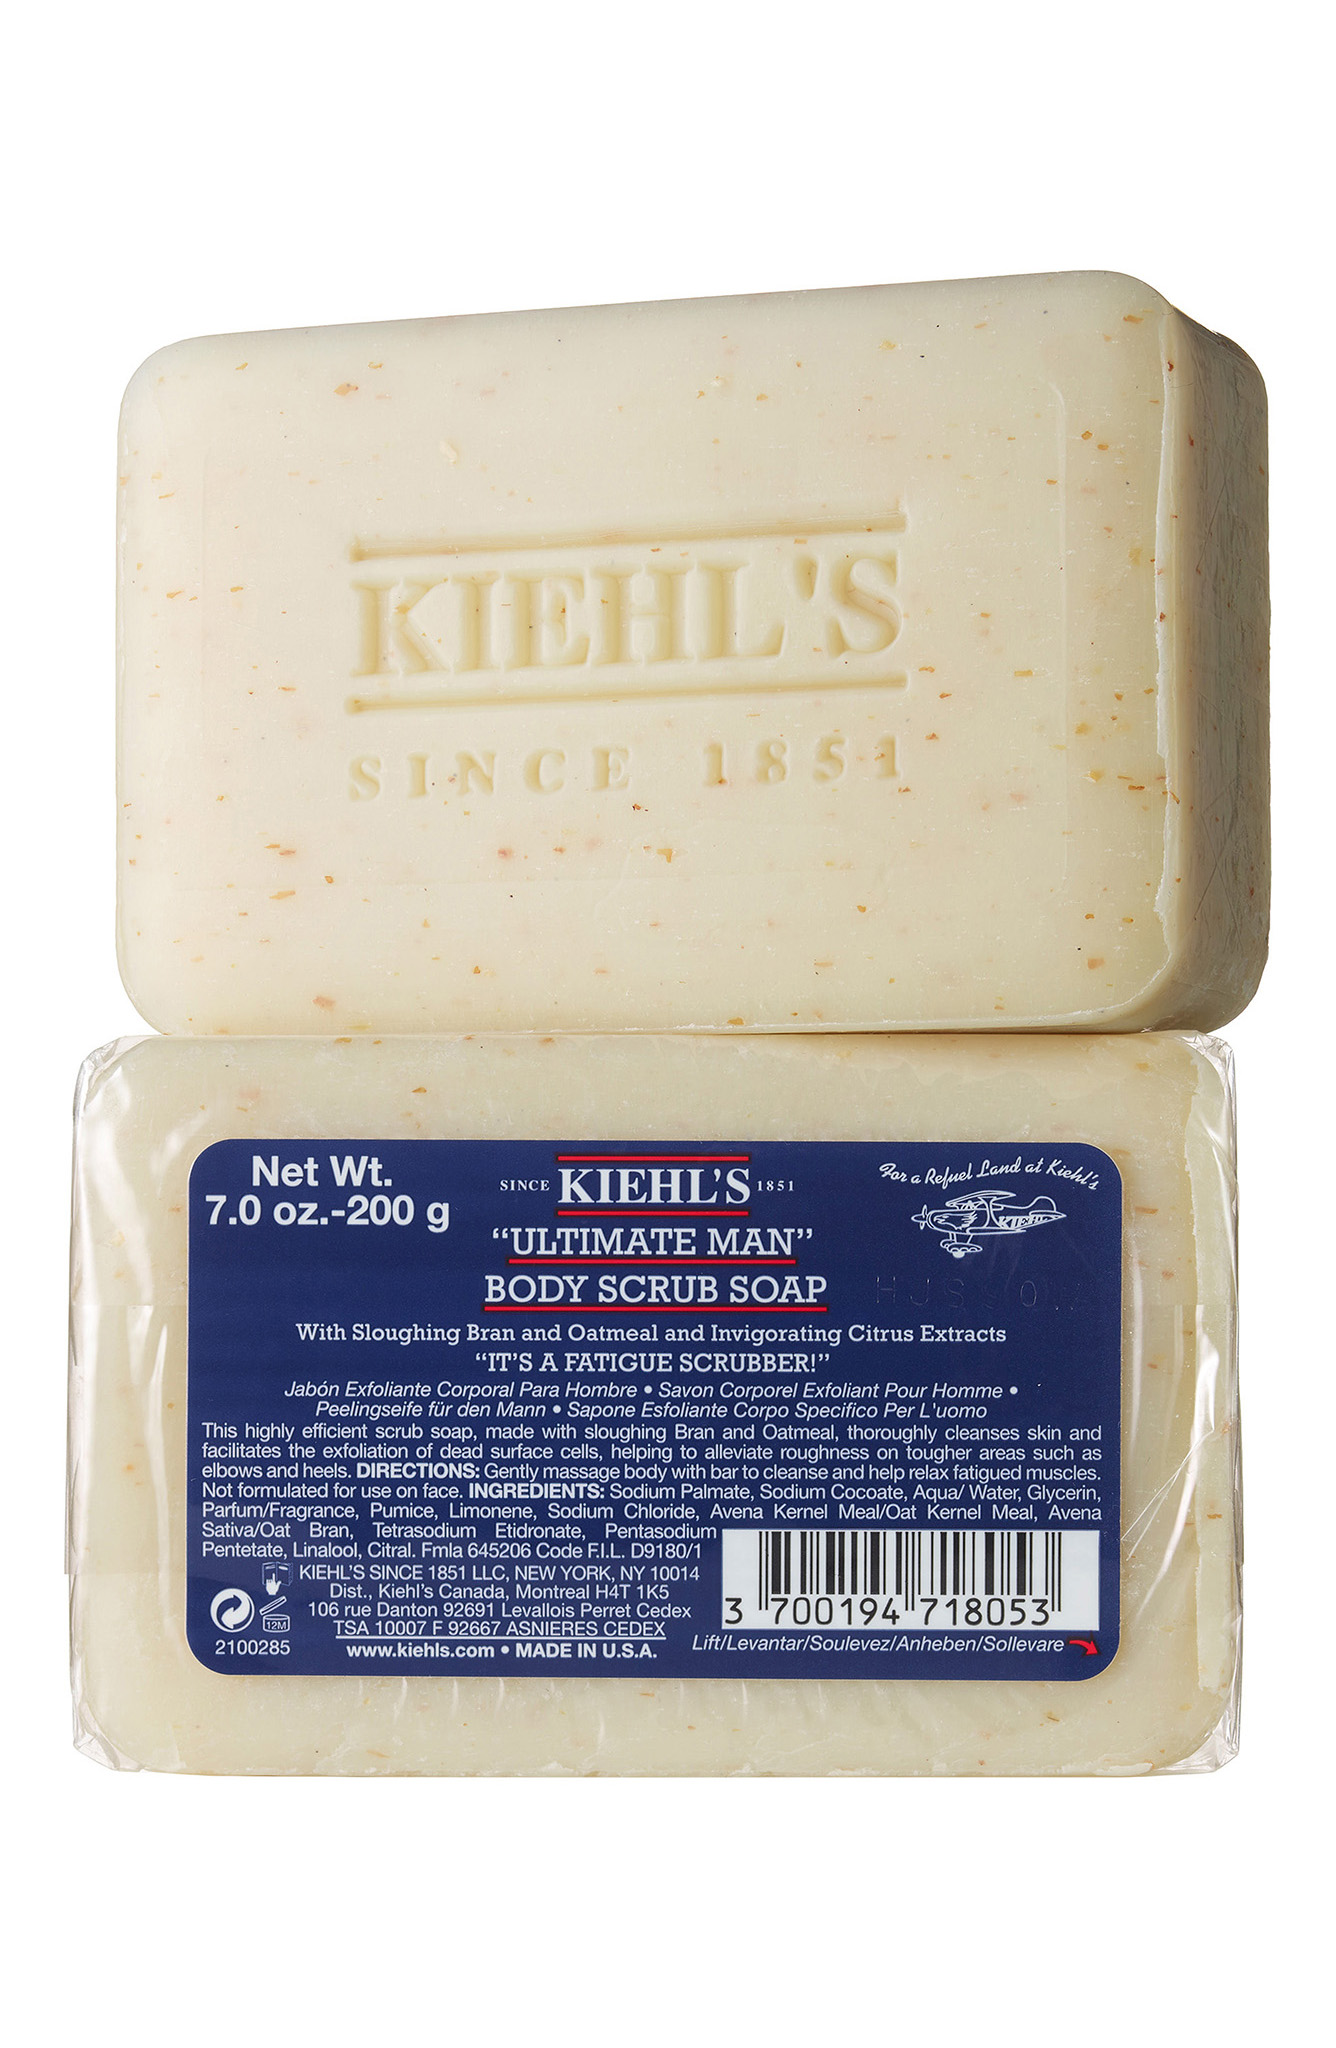 Kiehl’s Ultimate Man Body Scrub Soap Duo: Bar soap is misunderstood! These Kiehl’s bars have bran and oatmeal to slough your dead skin cells, which is great for rough areas like elbows and knees. I know so many women (including Autumne!) who steal this from their husbands to exfoliate and condition pre-shaving.